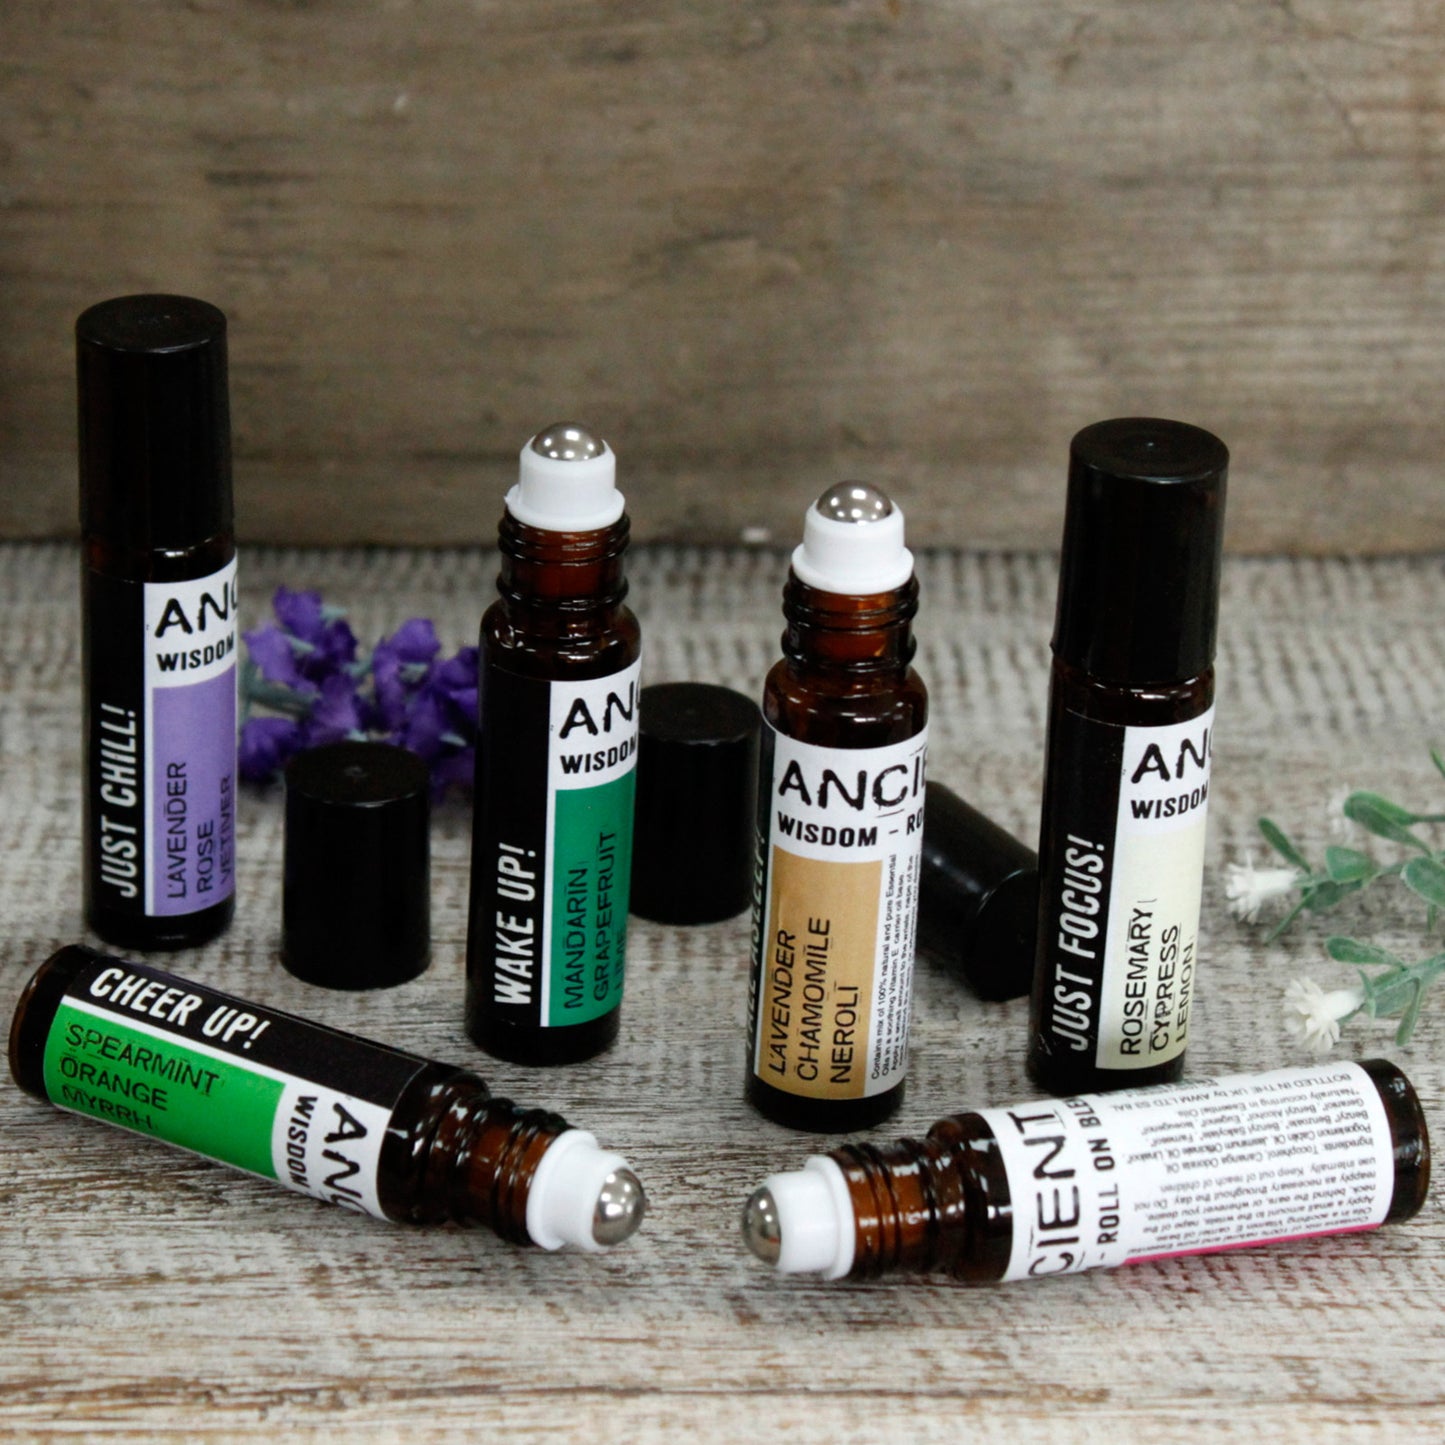 Get Physical! - Patchouli , Jasmine and Ylang Ylang 10ml Roll On Essential Oil Blend